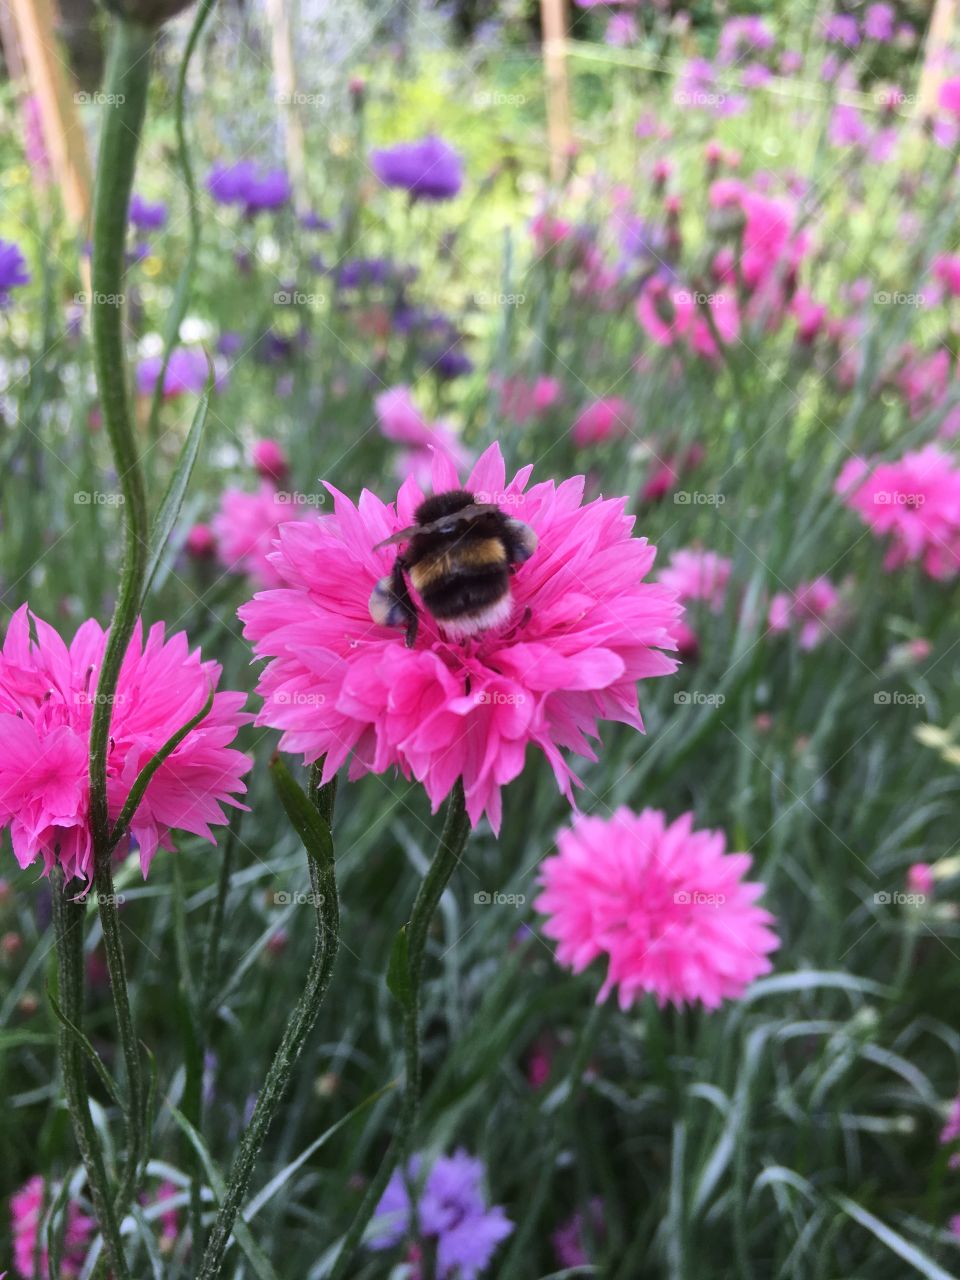 Bright pink cornflowers are an attraction for this bee